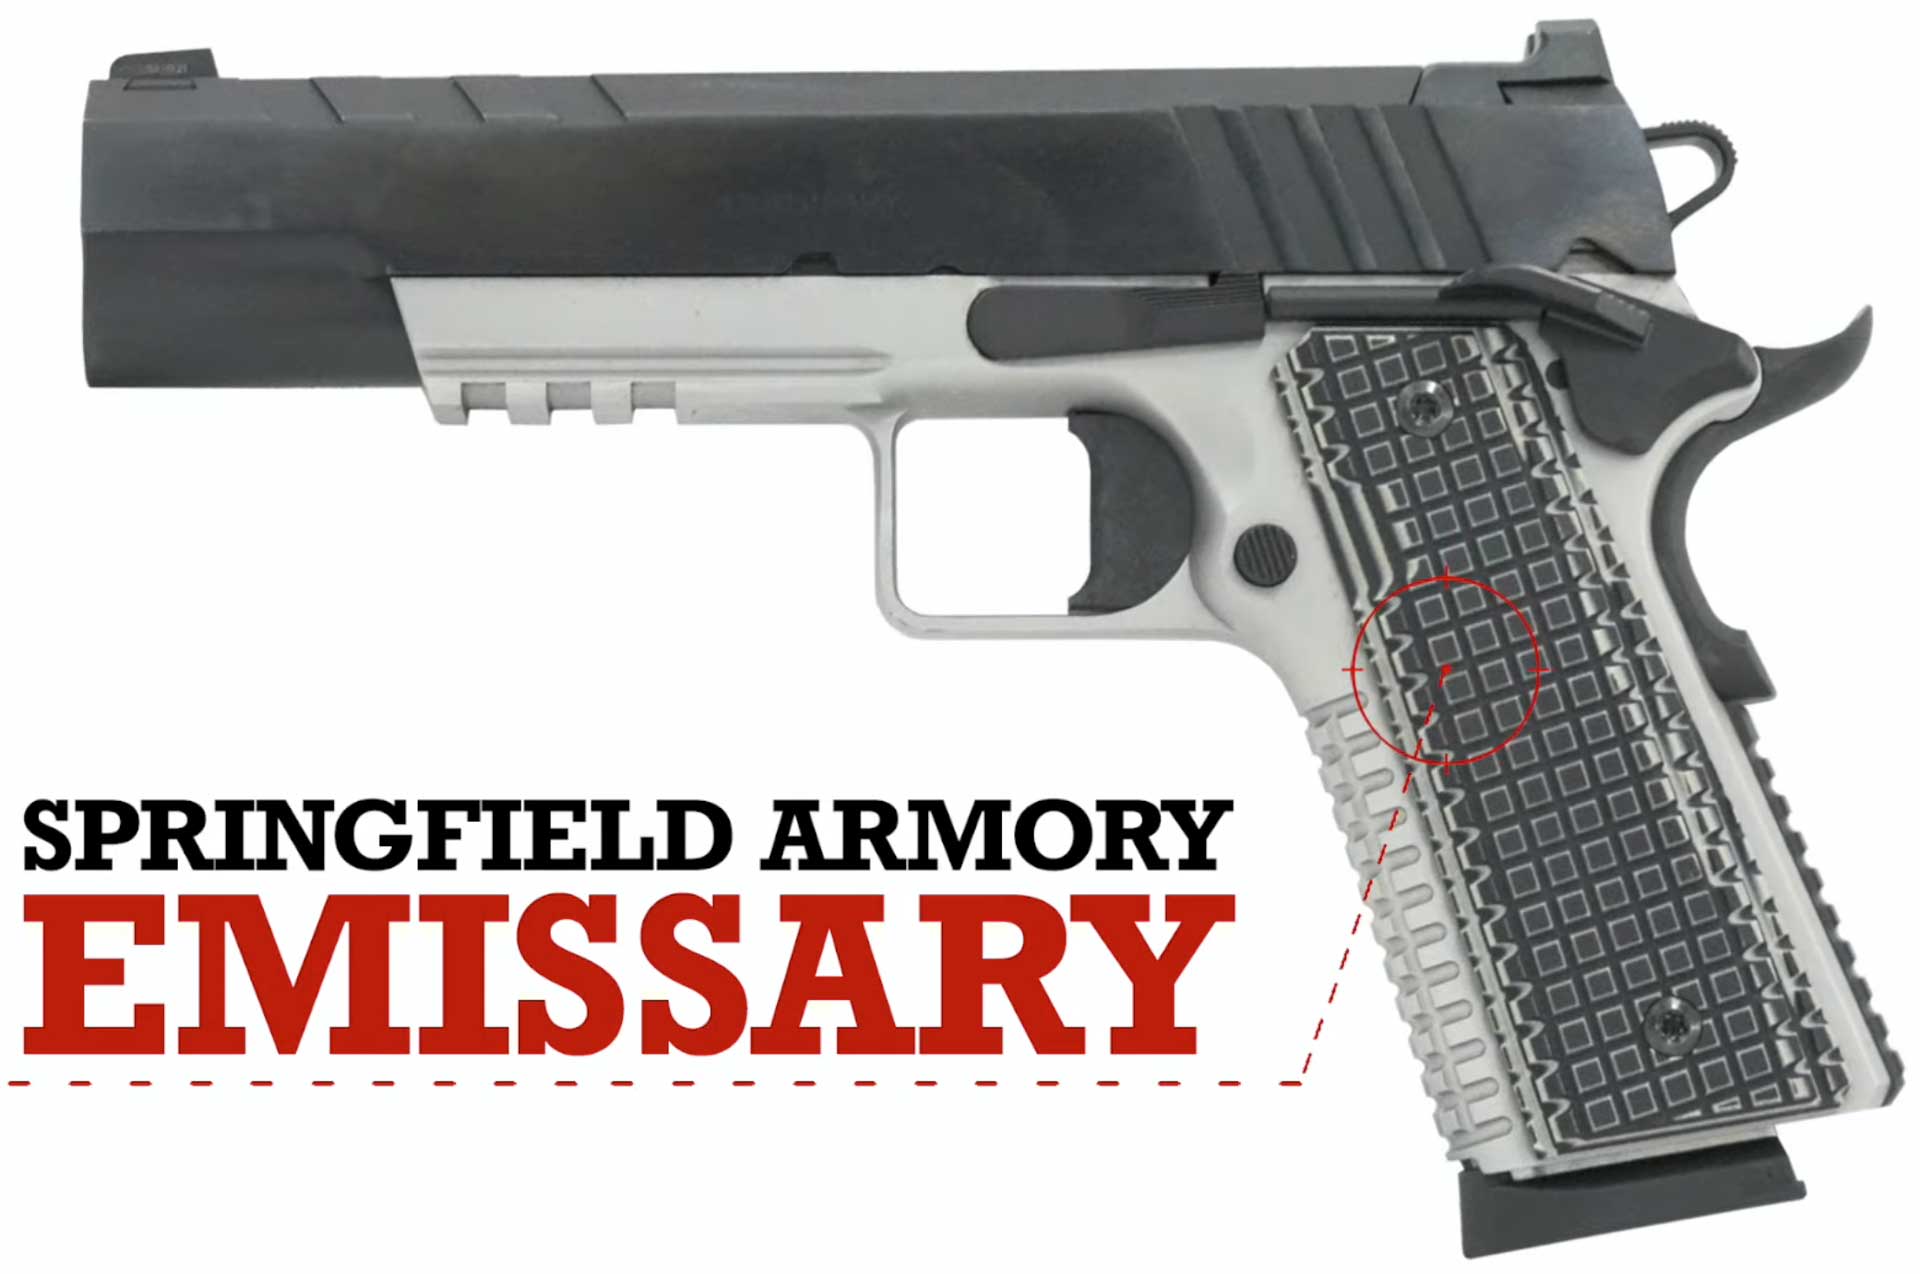 left side hangun pistol two-tone black silver text on image noting "Springfield Armory Emissary"